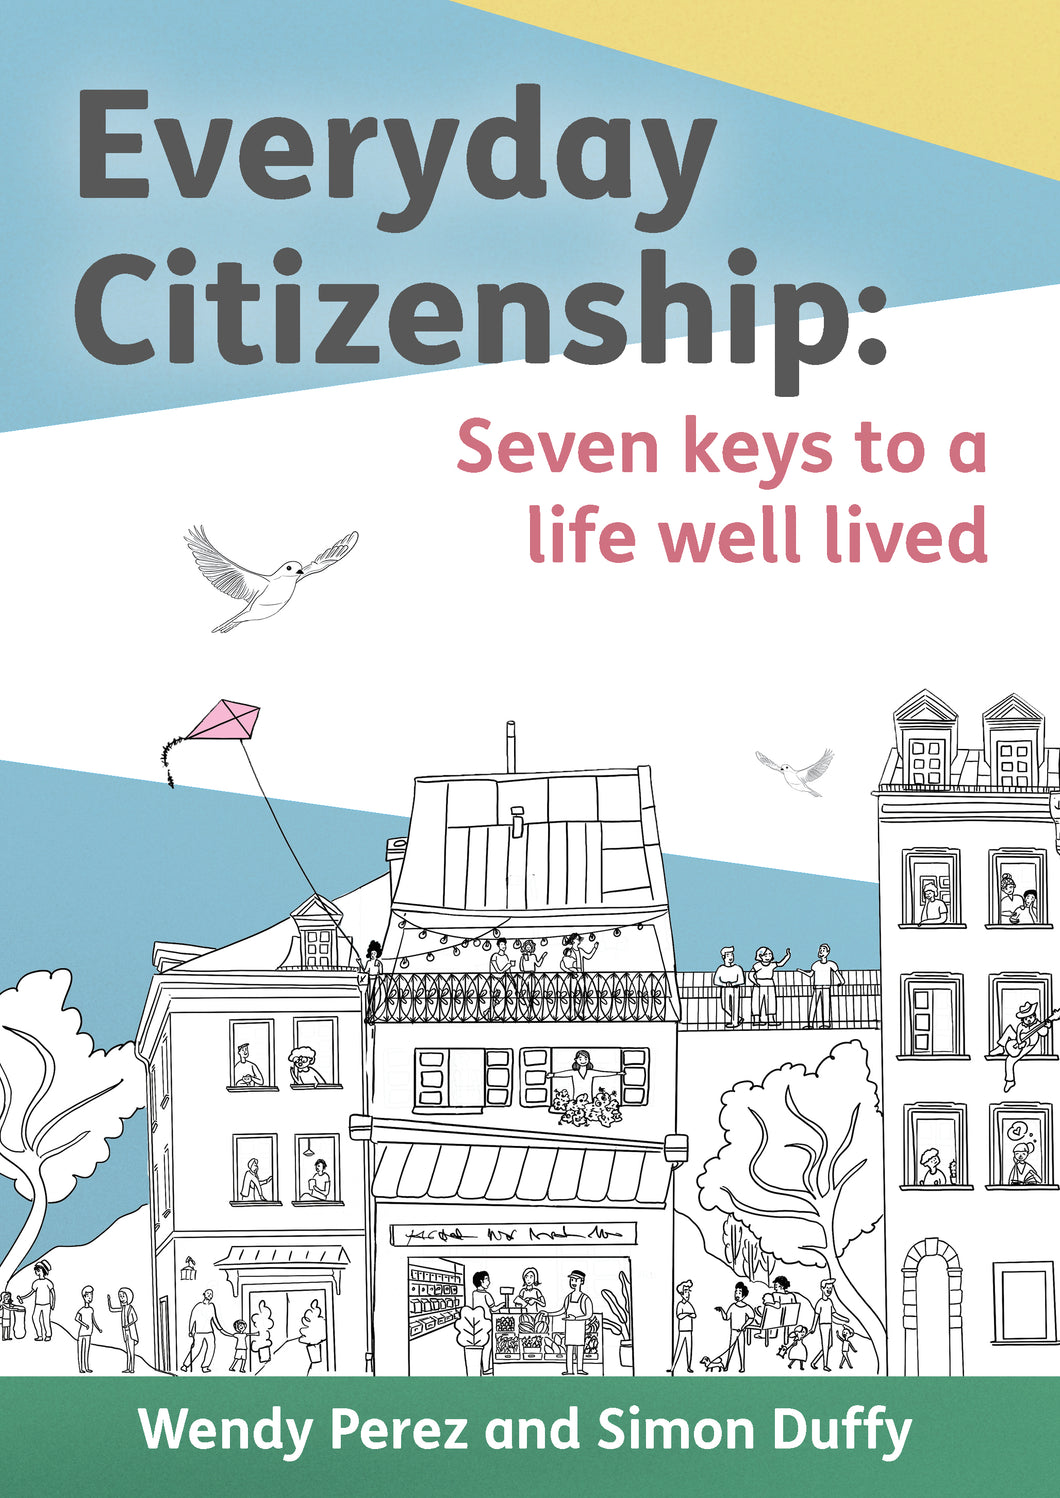 Everyday Citizenship: Seven keys to a life well lived